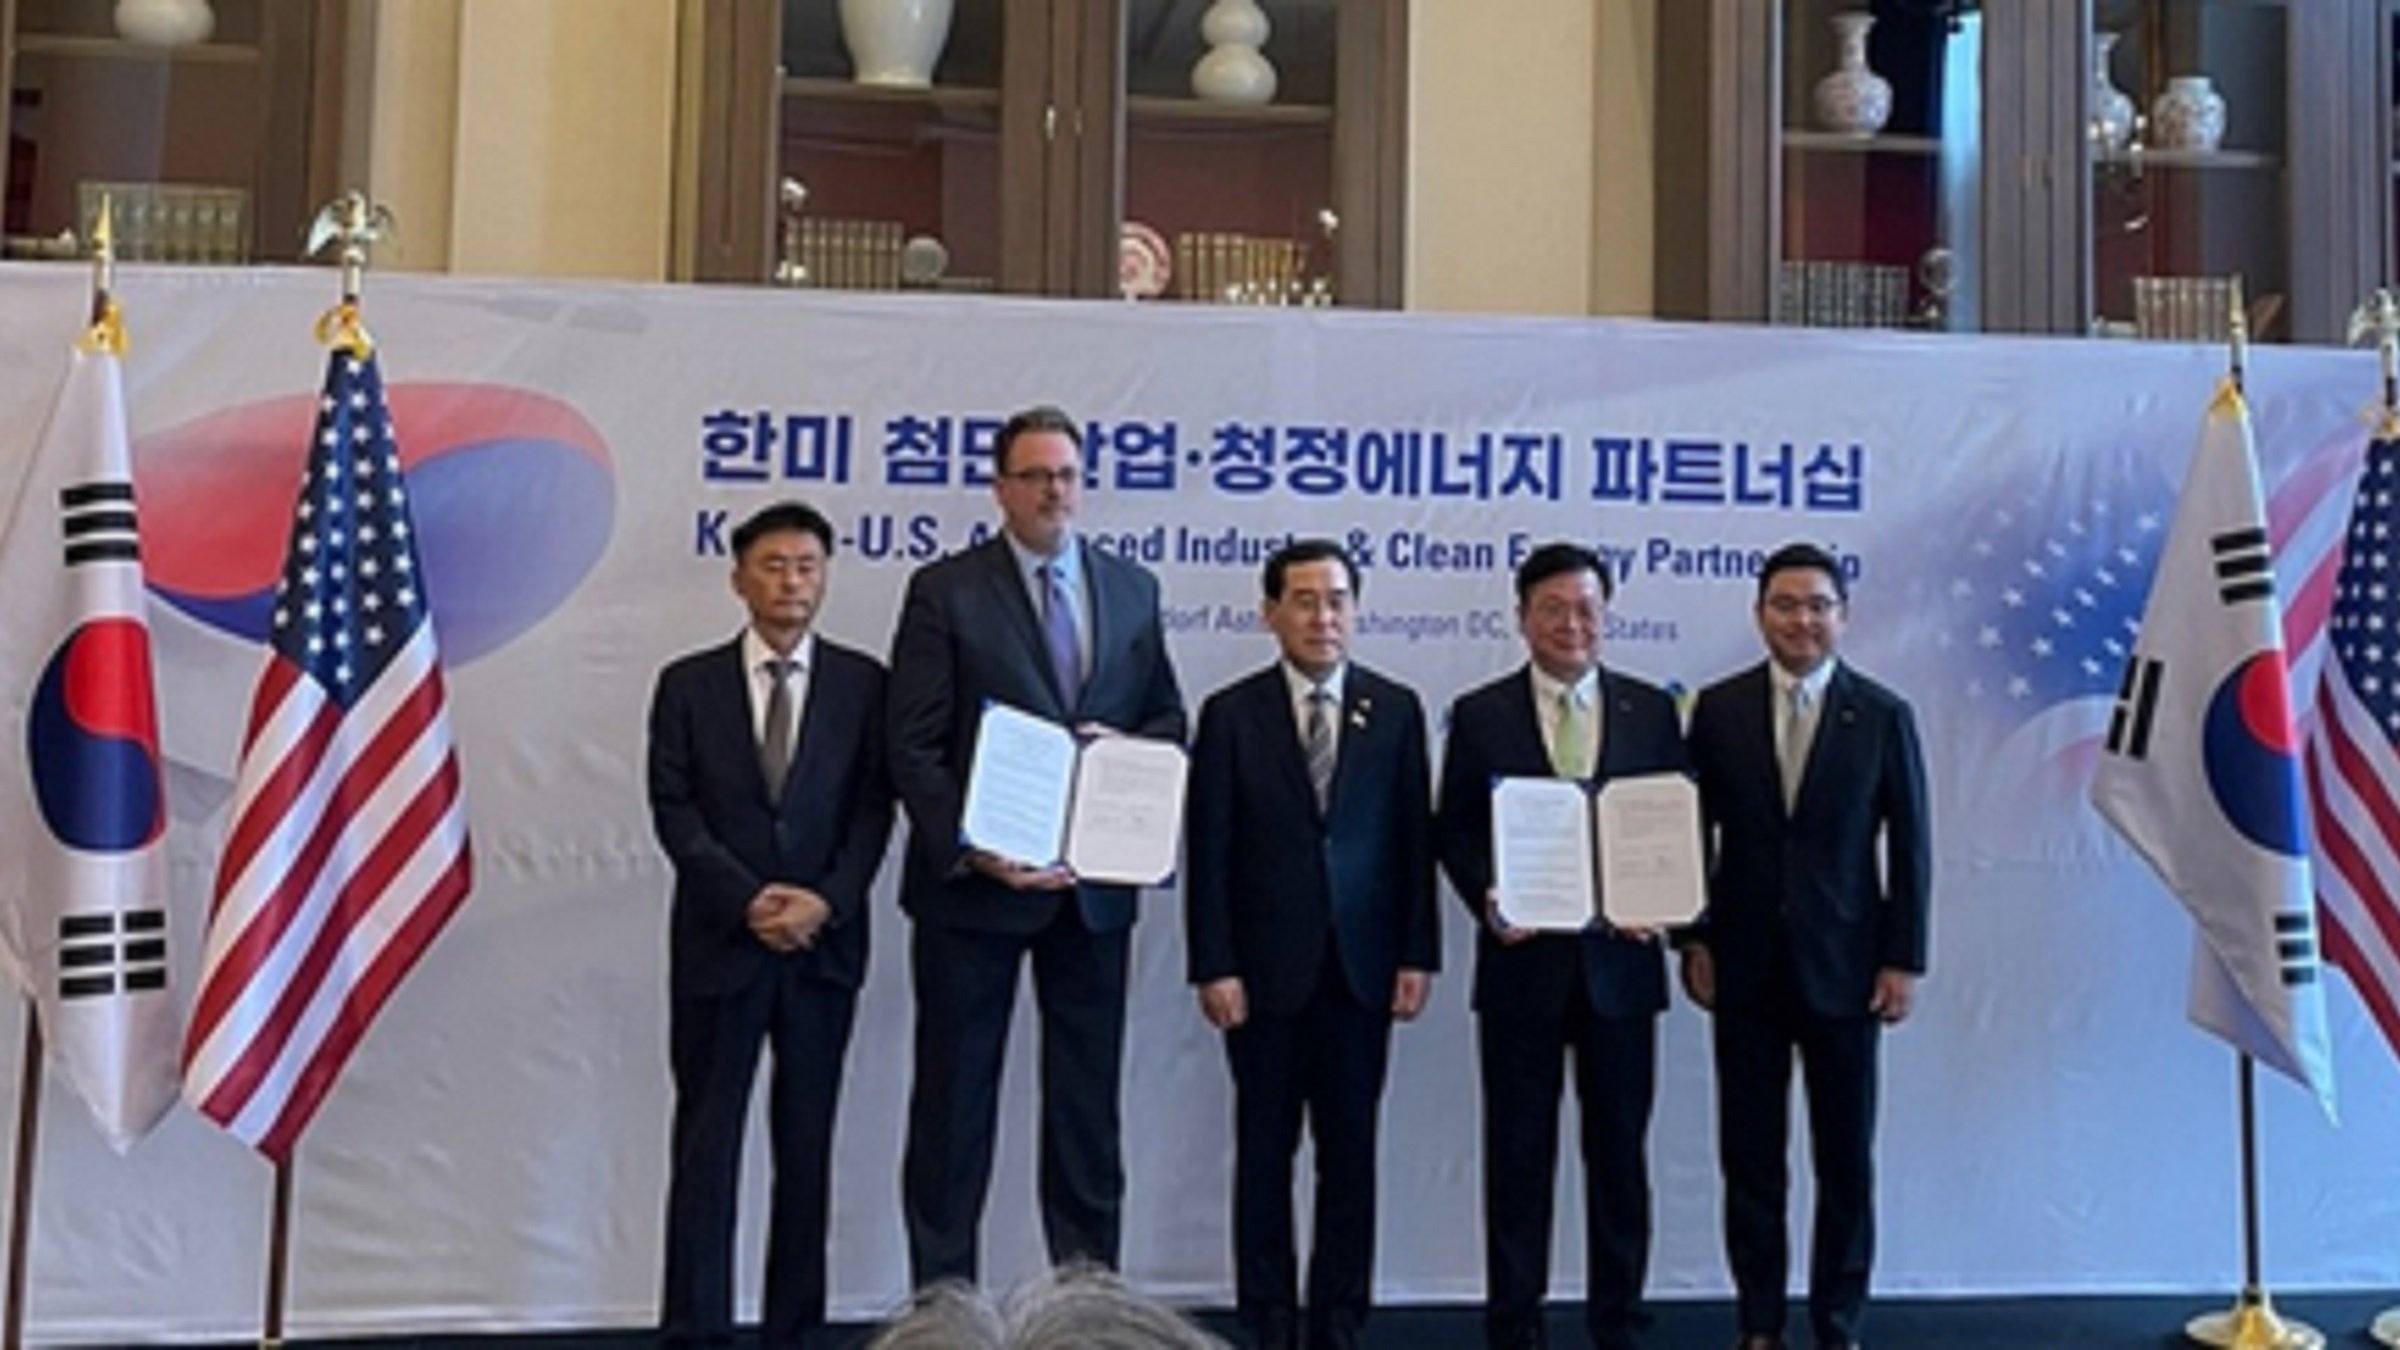 Rockwell Automation and Doosan Unite to Form Partnership as the U.S. and South Korea Celebrate Historic Anniversary